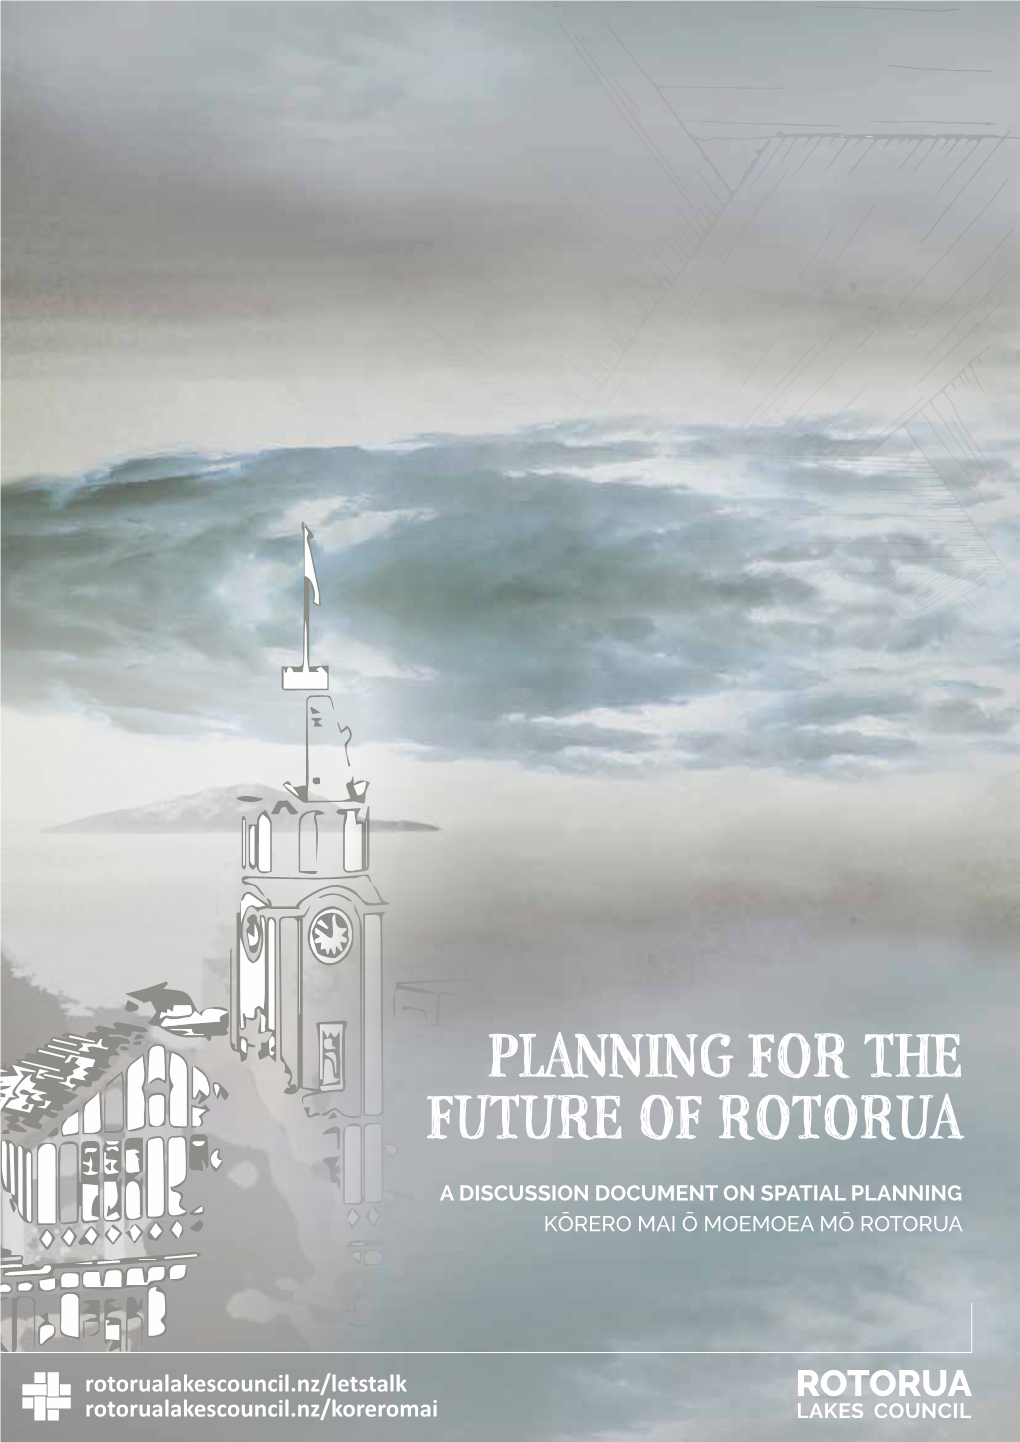 Planning for the Future of Rotorua